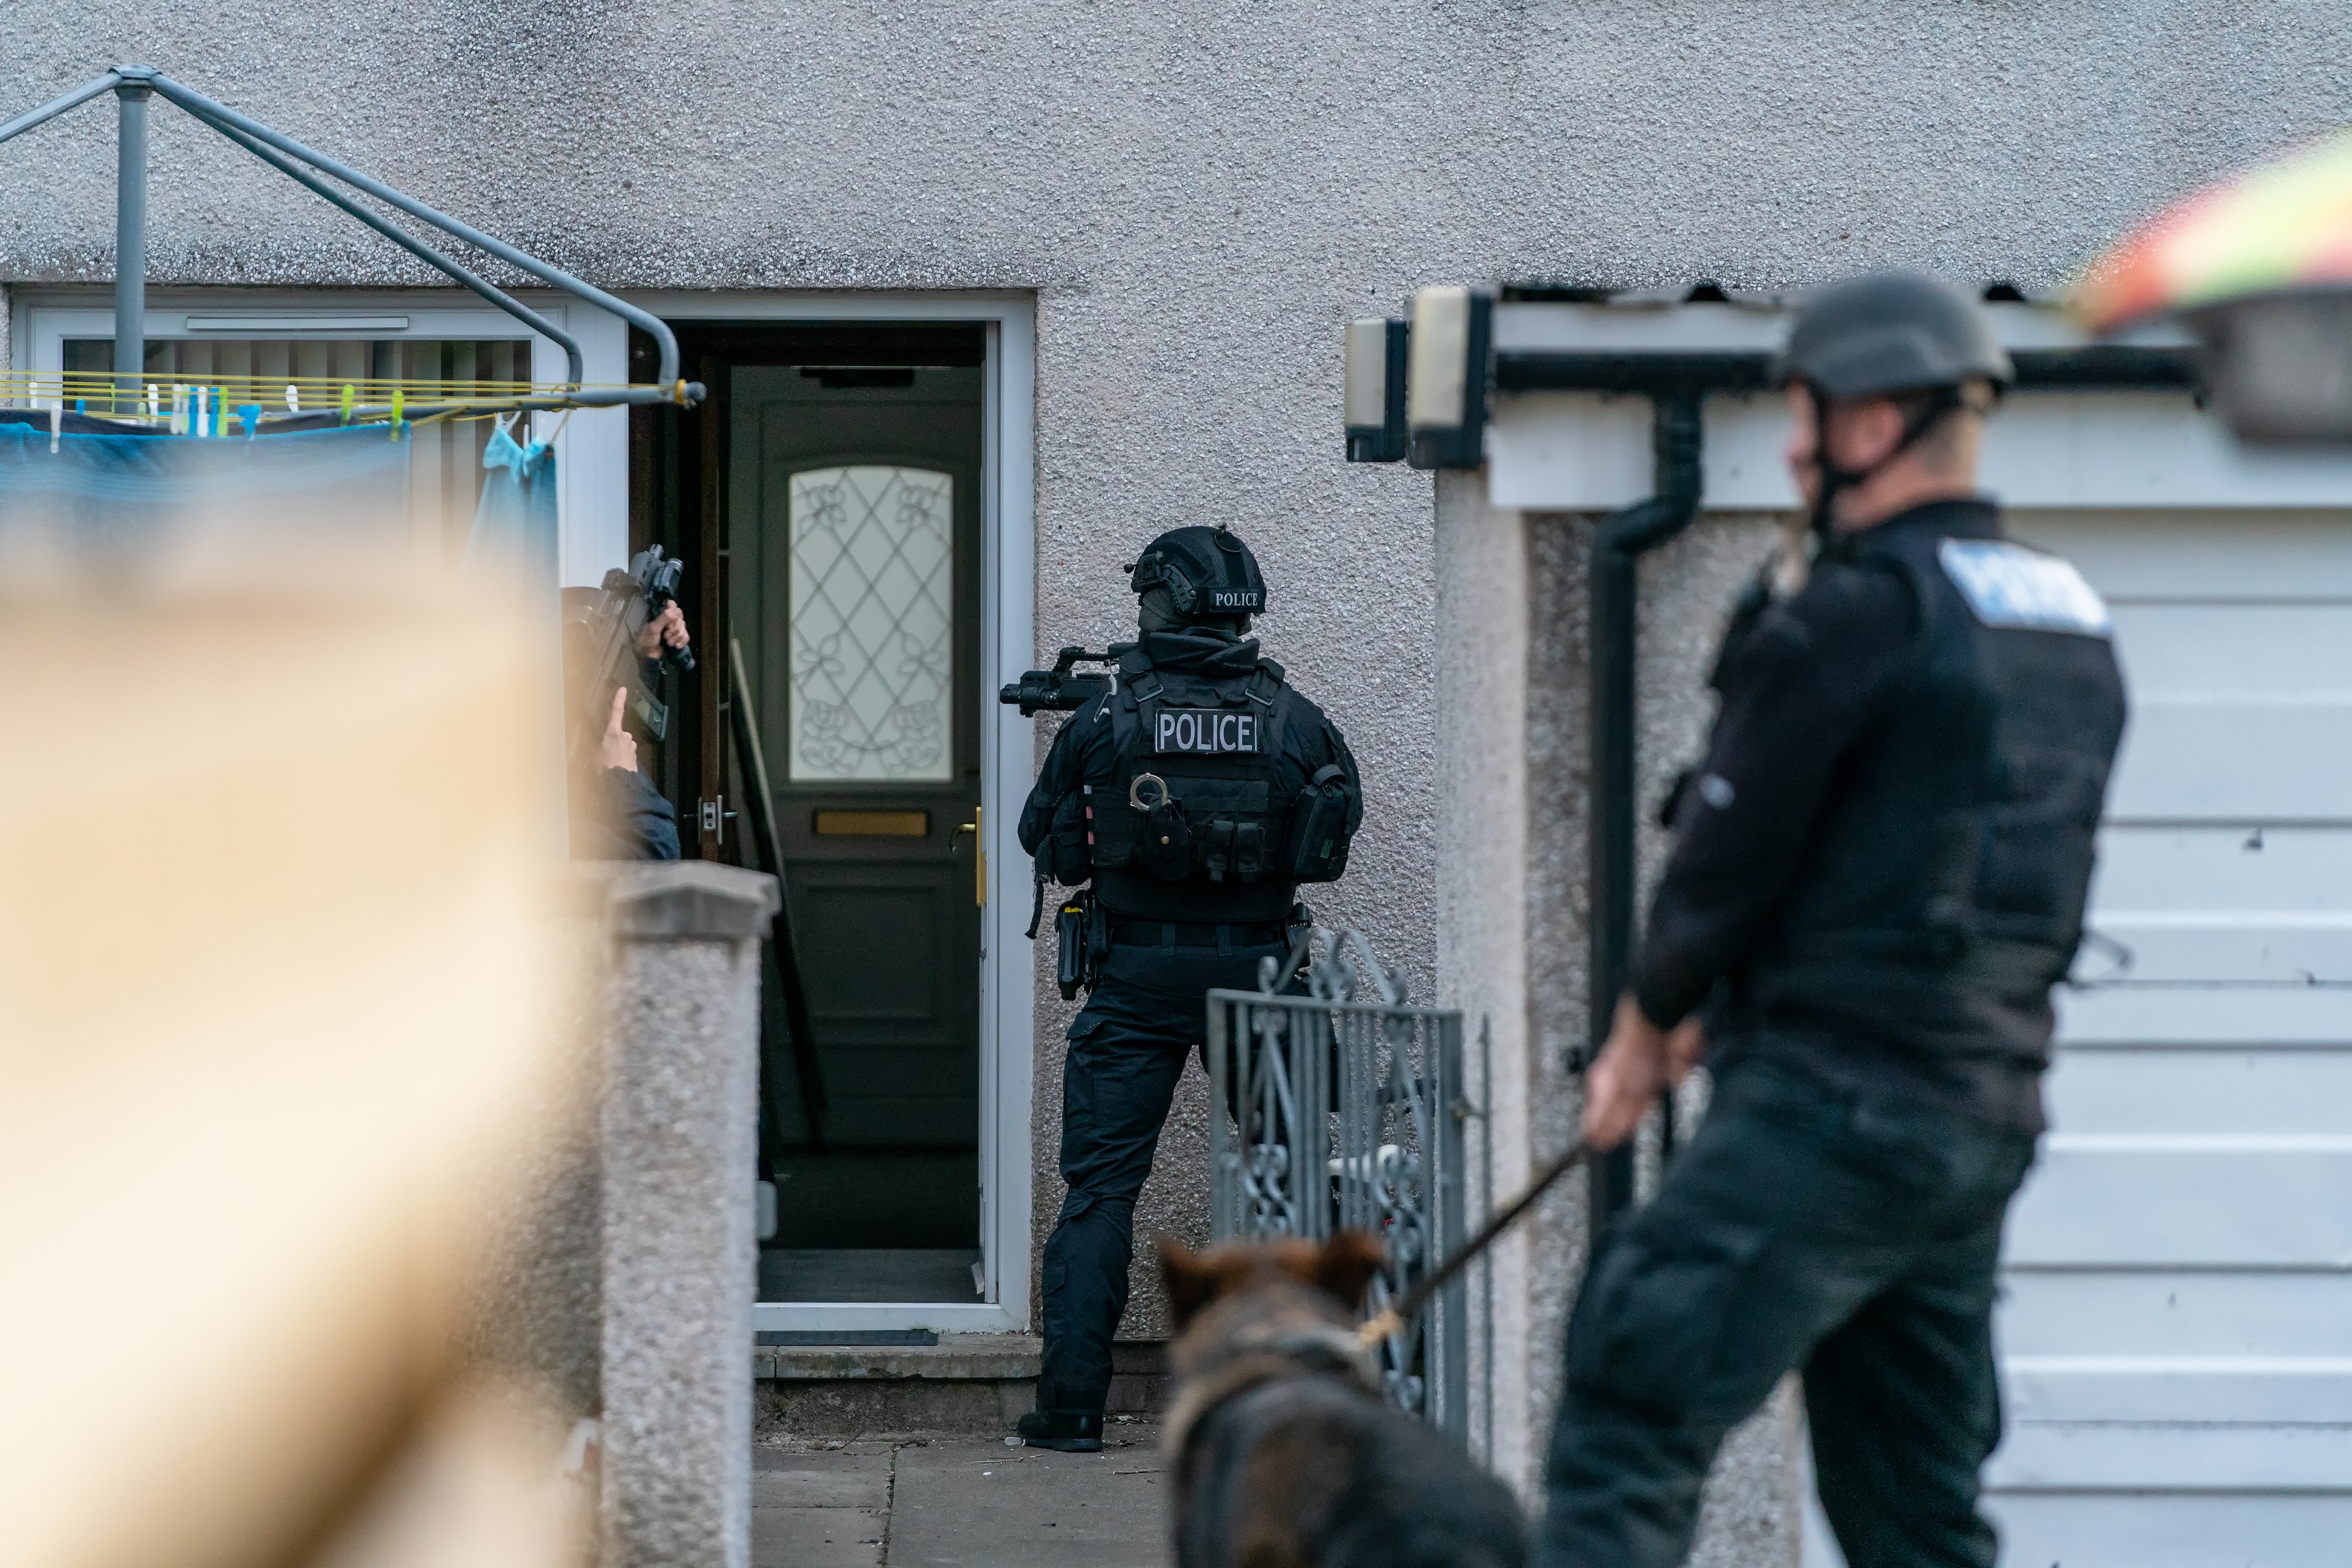 Police officers conducting a raid on a house | Source: Shutterstock.com